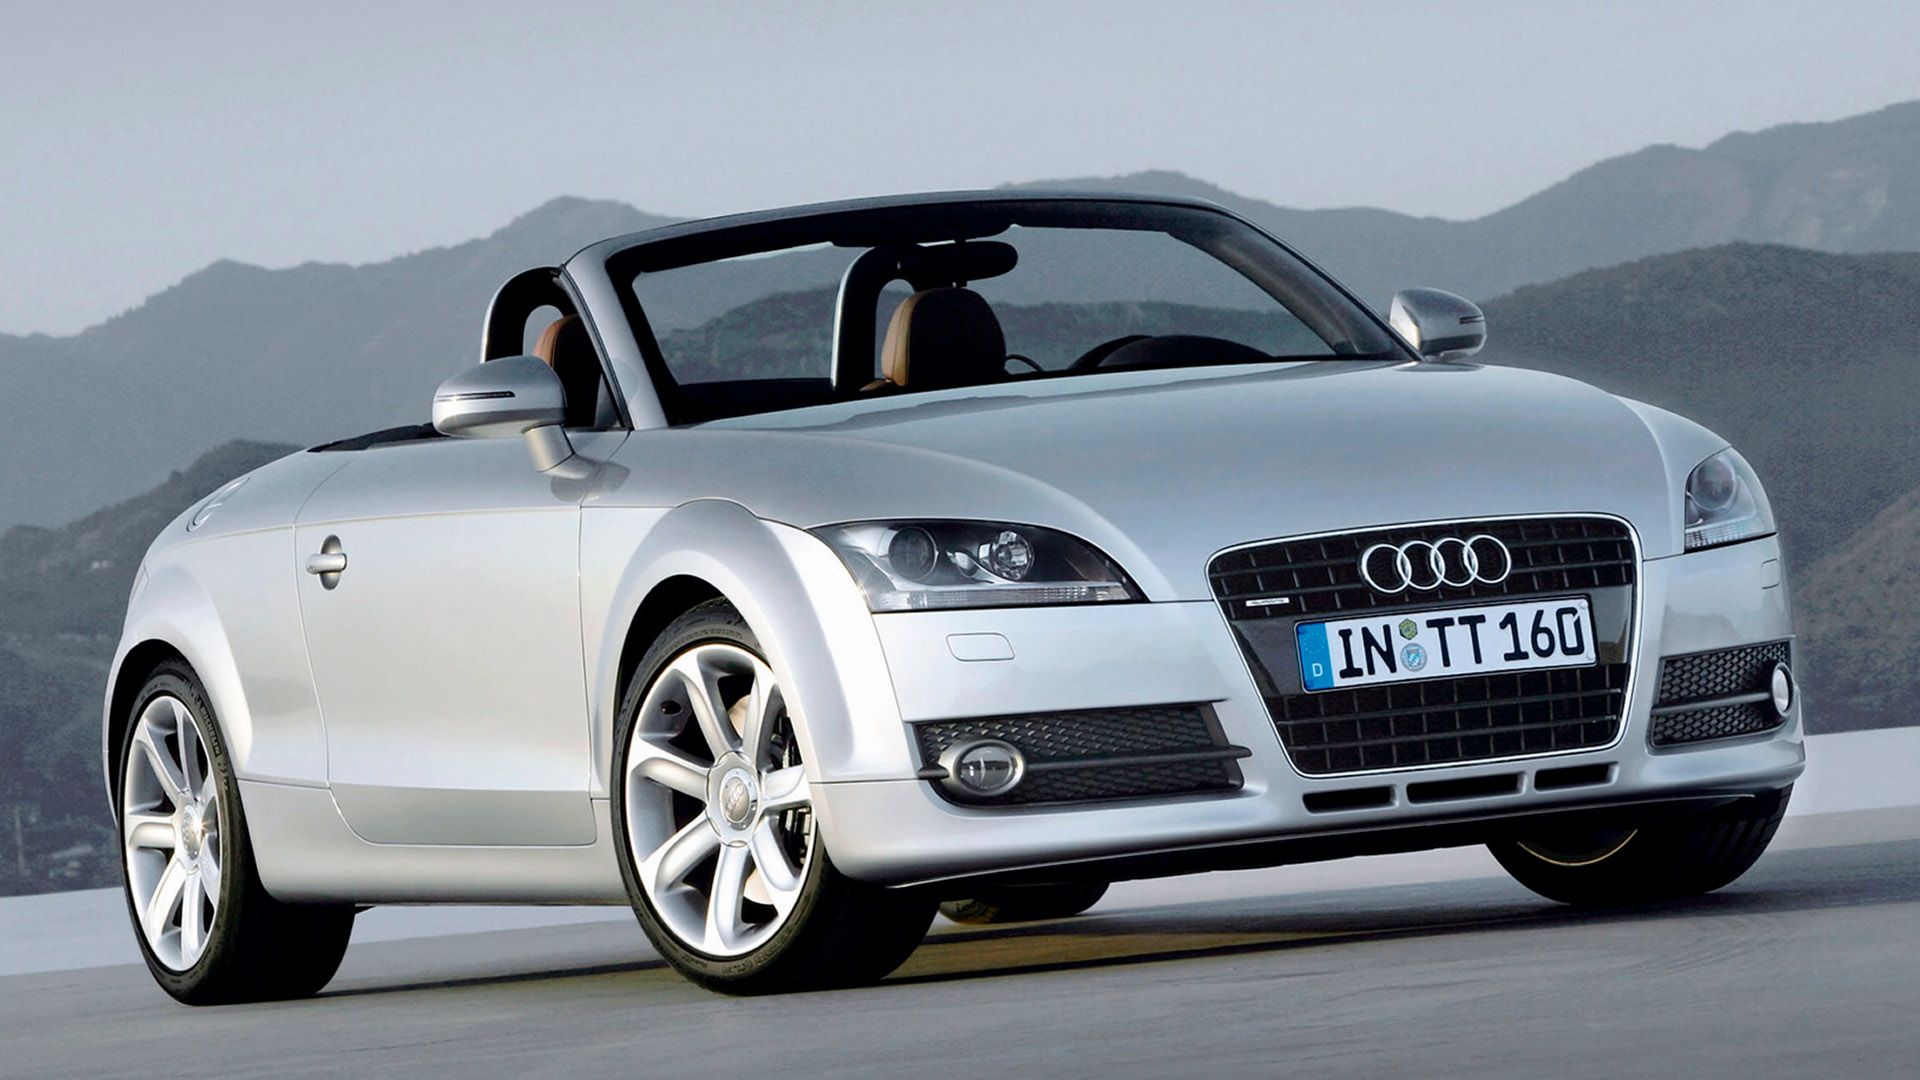 Silver Audi TT Roadster on the carriageway